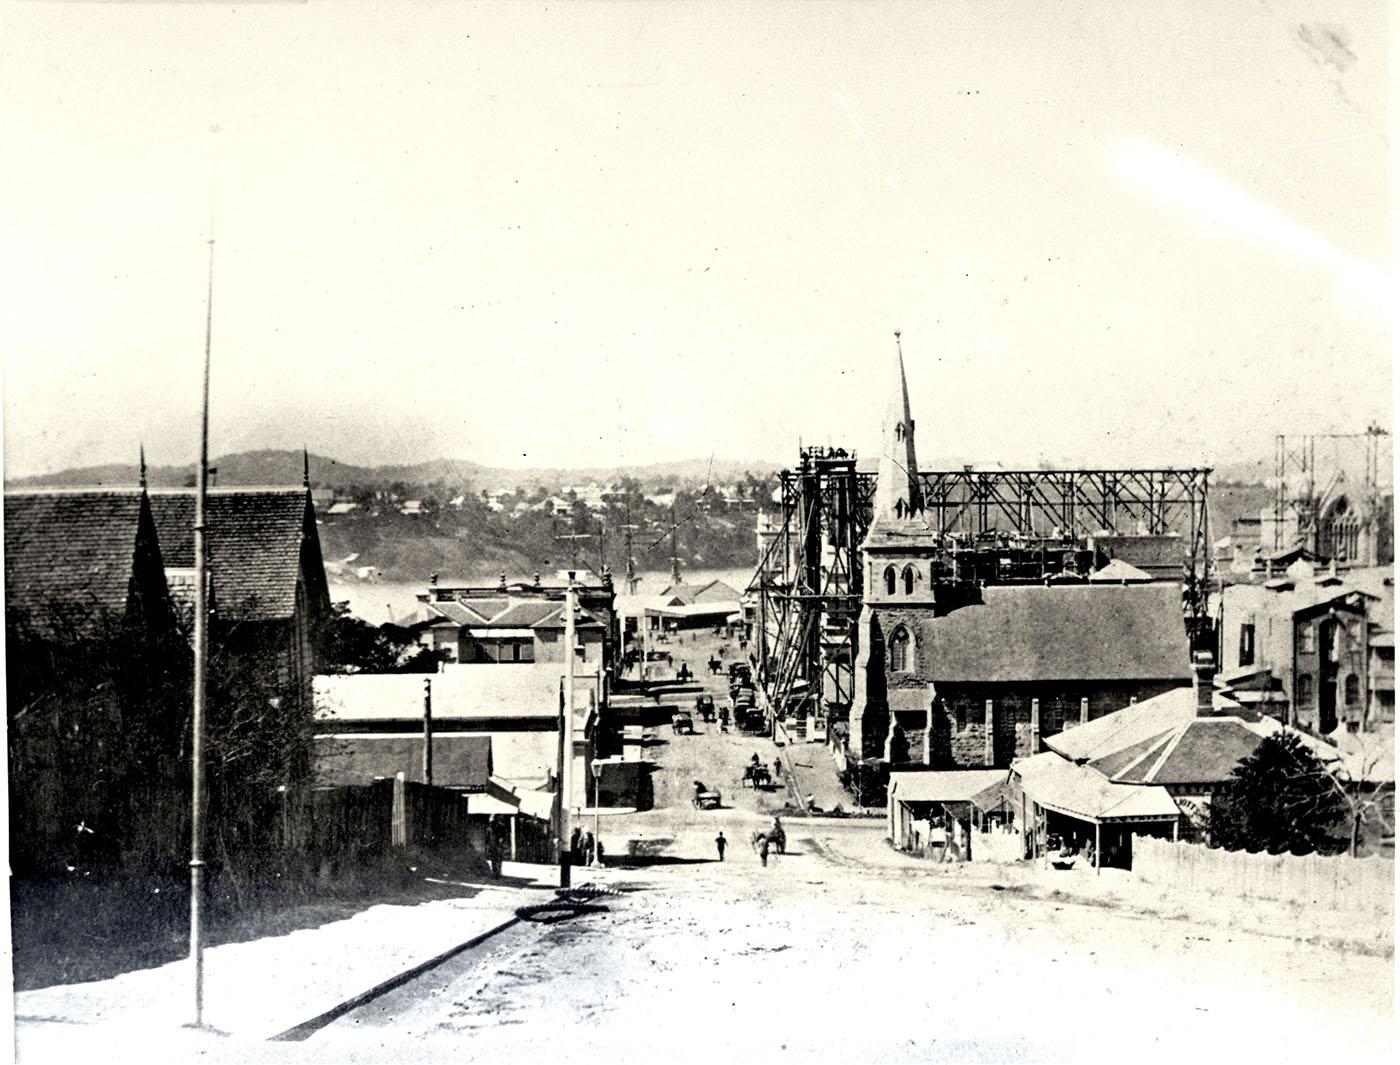 View of Creek Street, looking south and showing some smaller buildings